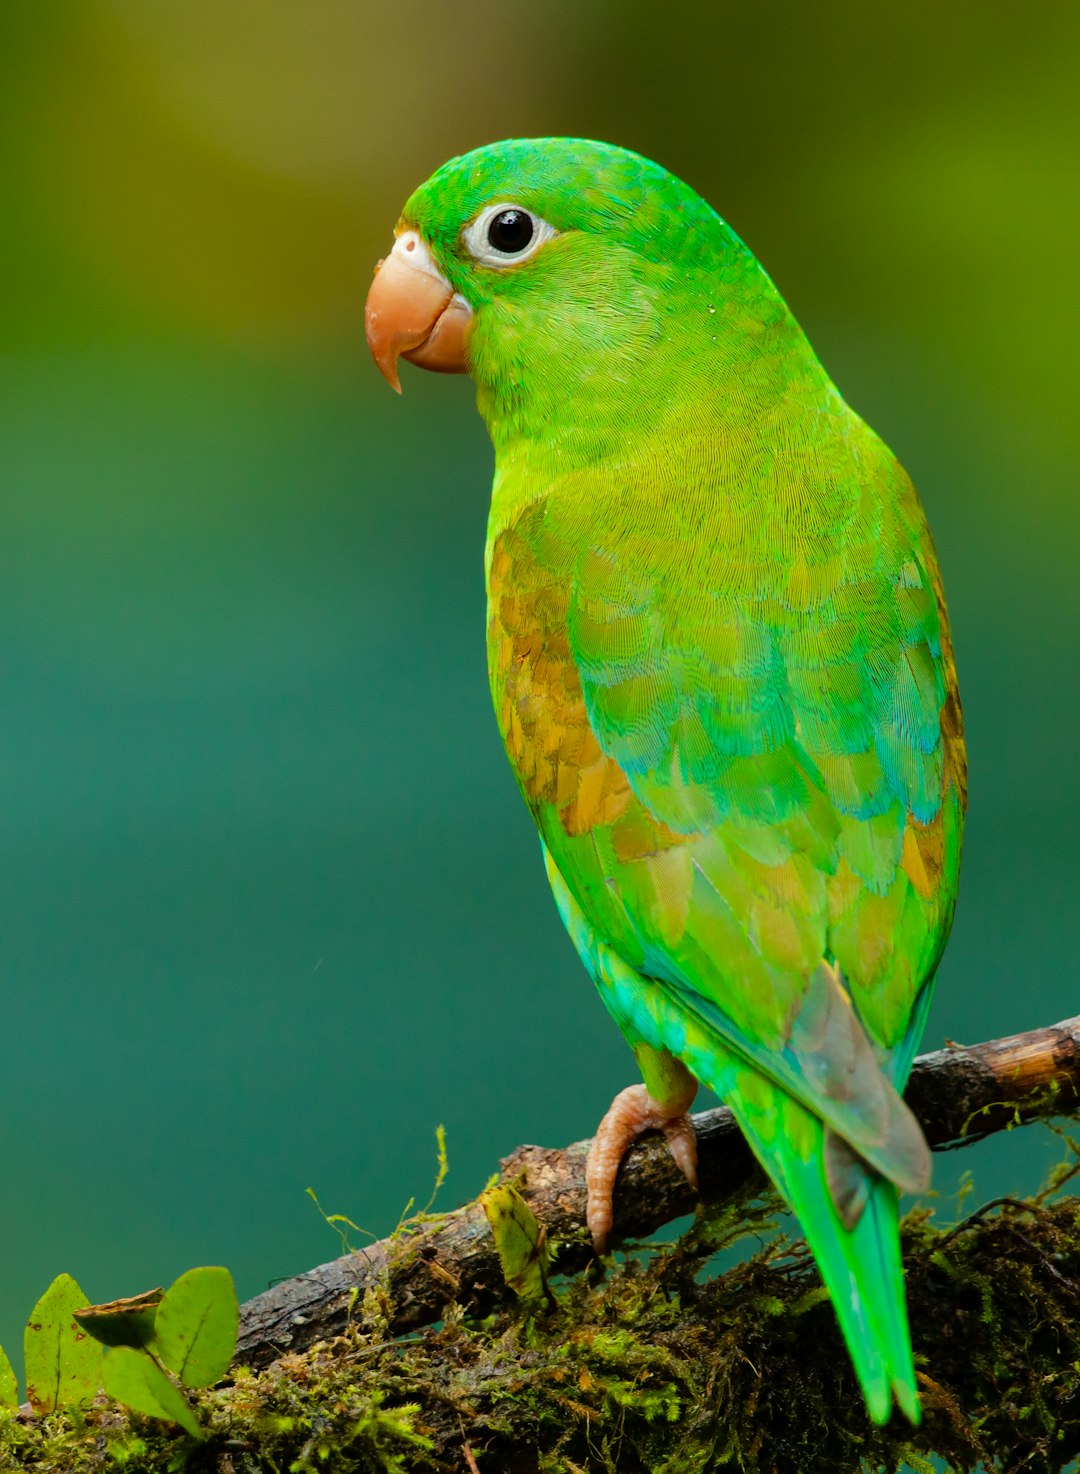  green and yellow small beaked bird on twig parrot